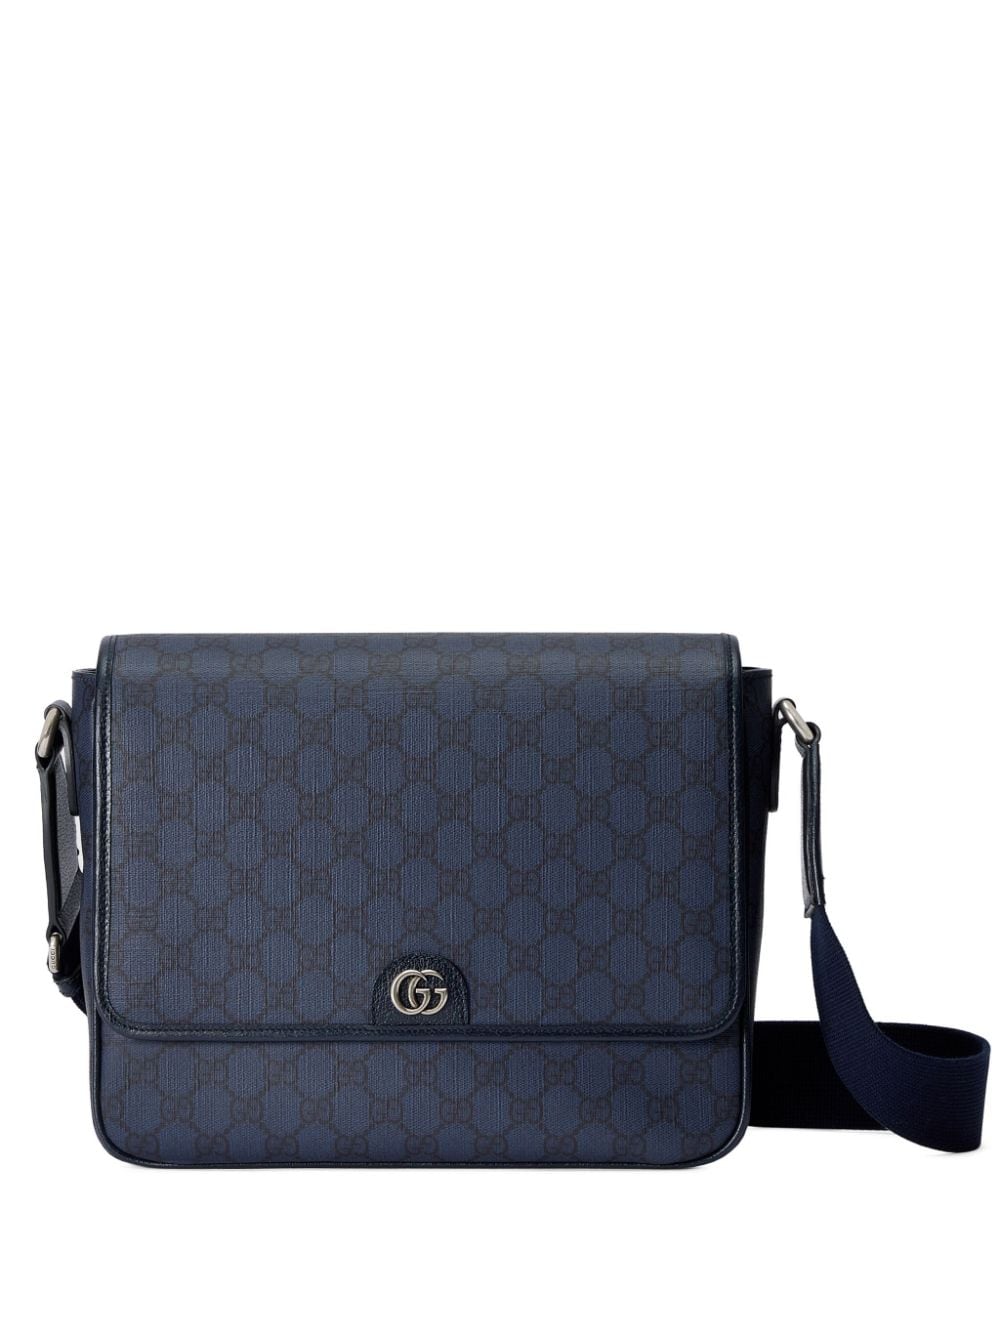 GUCCI Blue Leather Shoulder-Handbag with GG Supreme Fabric and Antique Silver-Tone Hardware